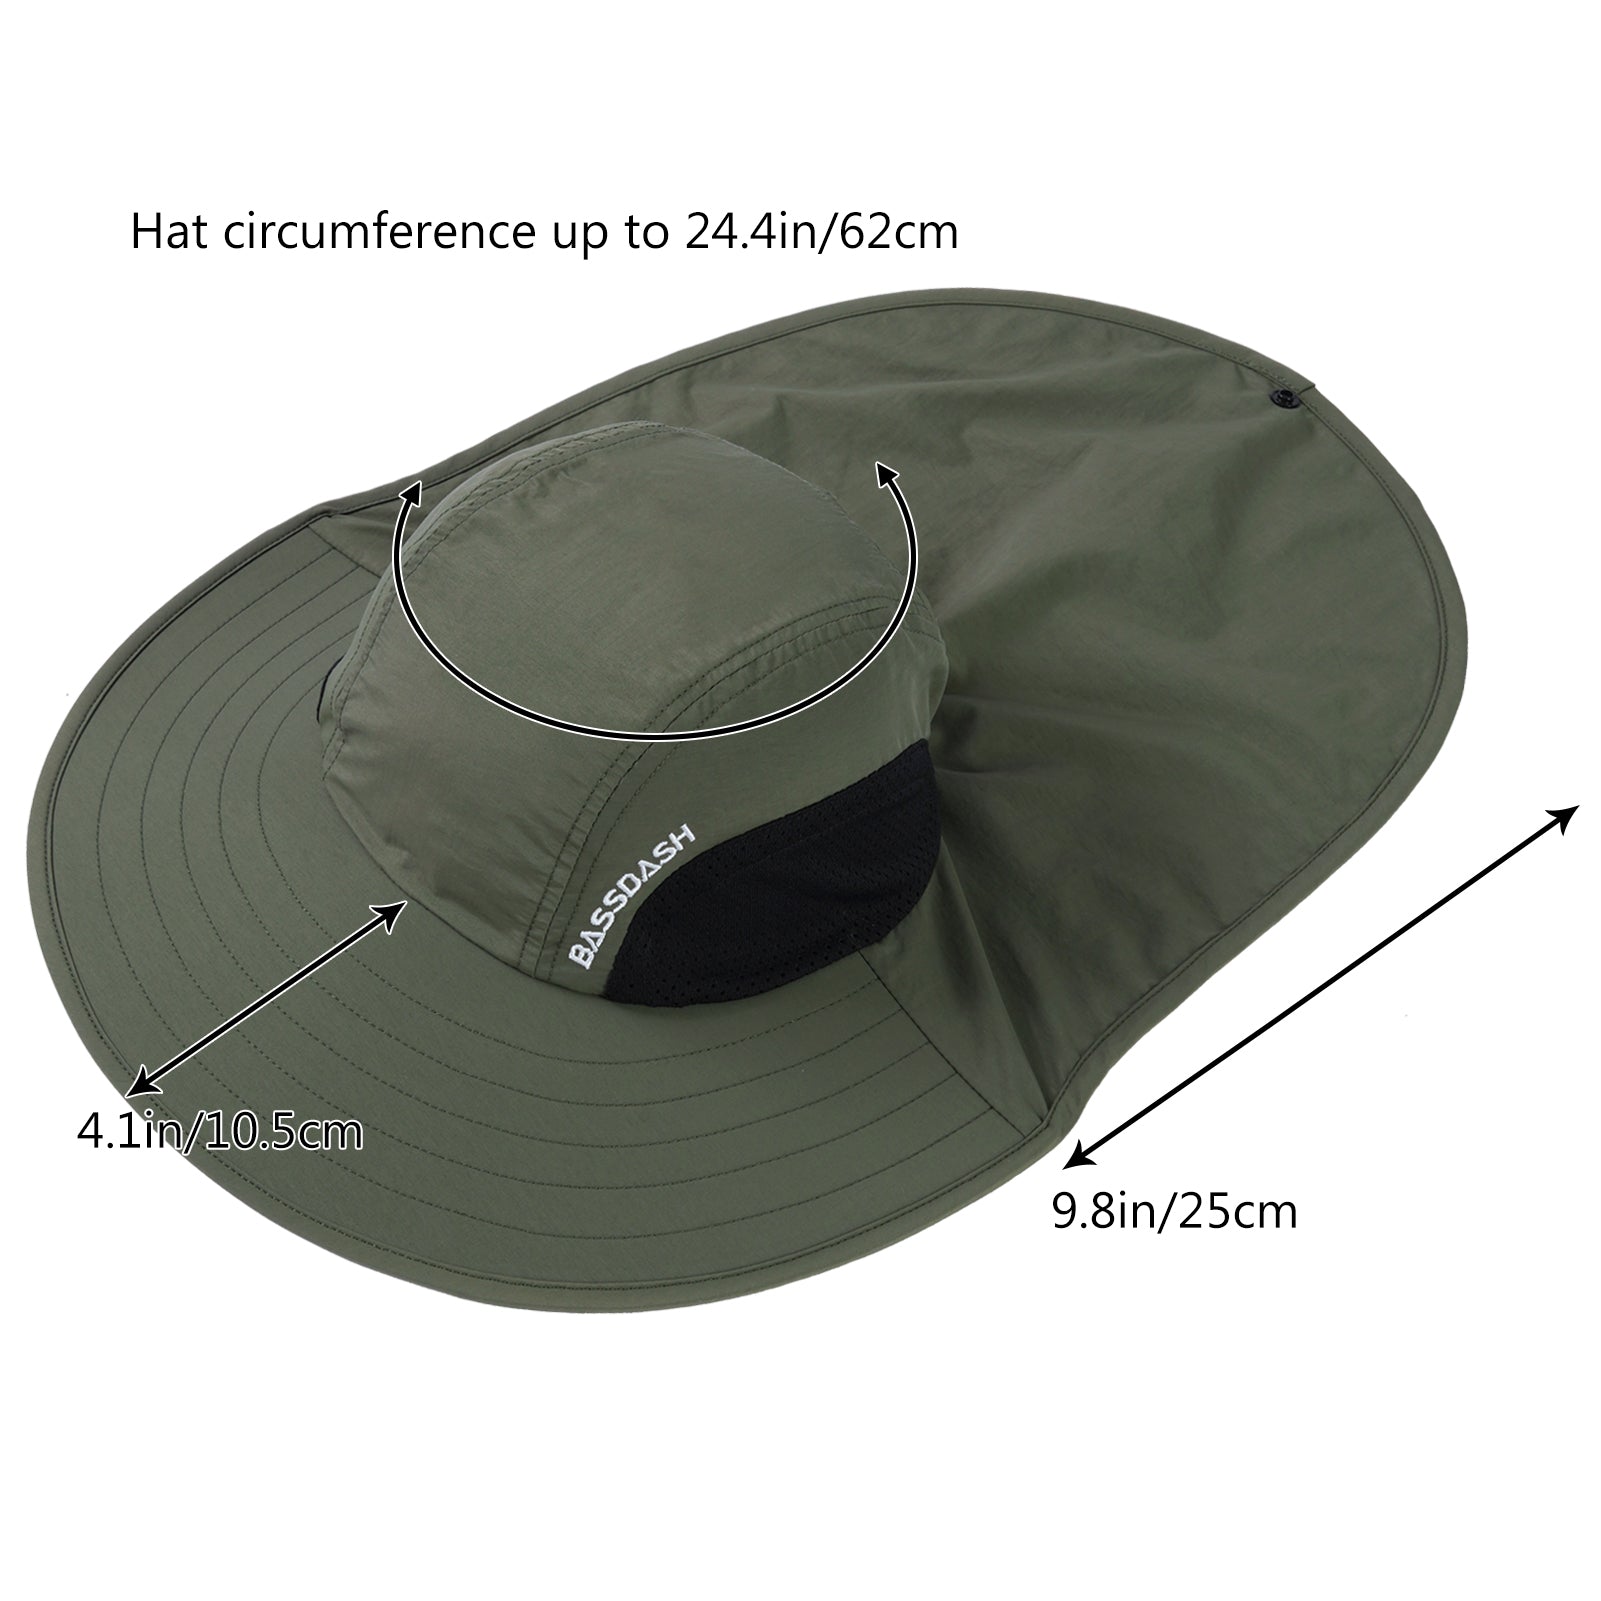 Wide Brim Stylish Hat With Ear Neck Flap, UPF50 Sun Protection